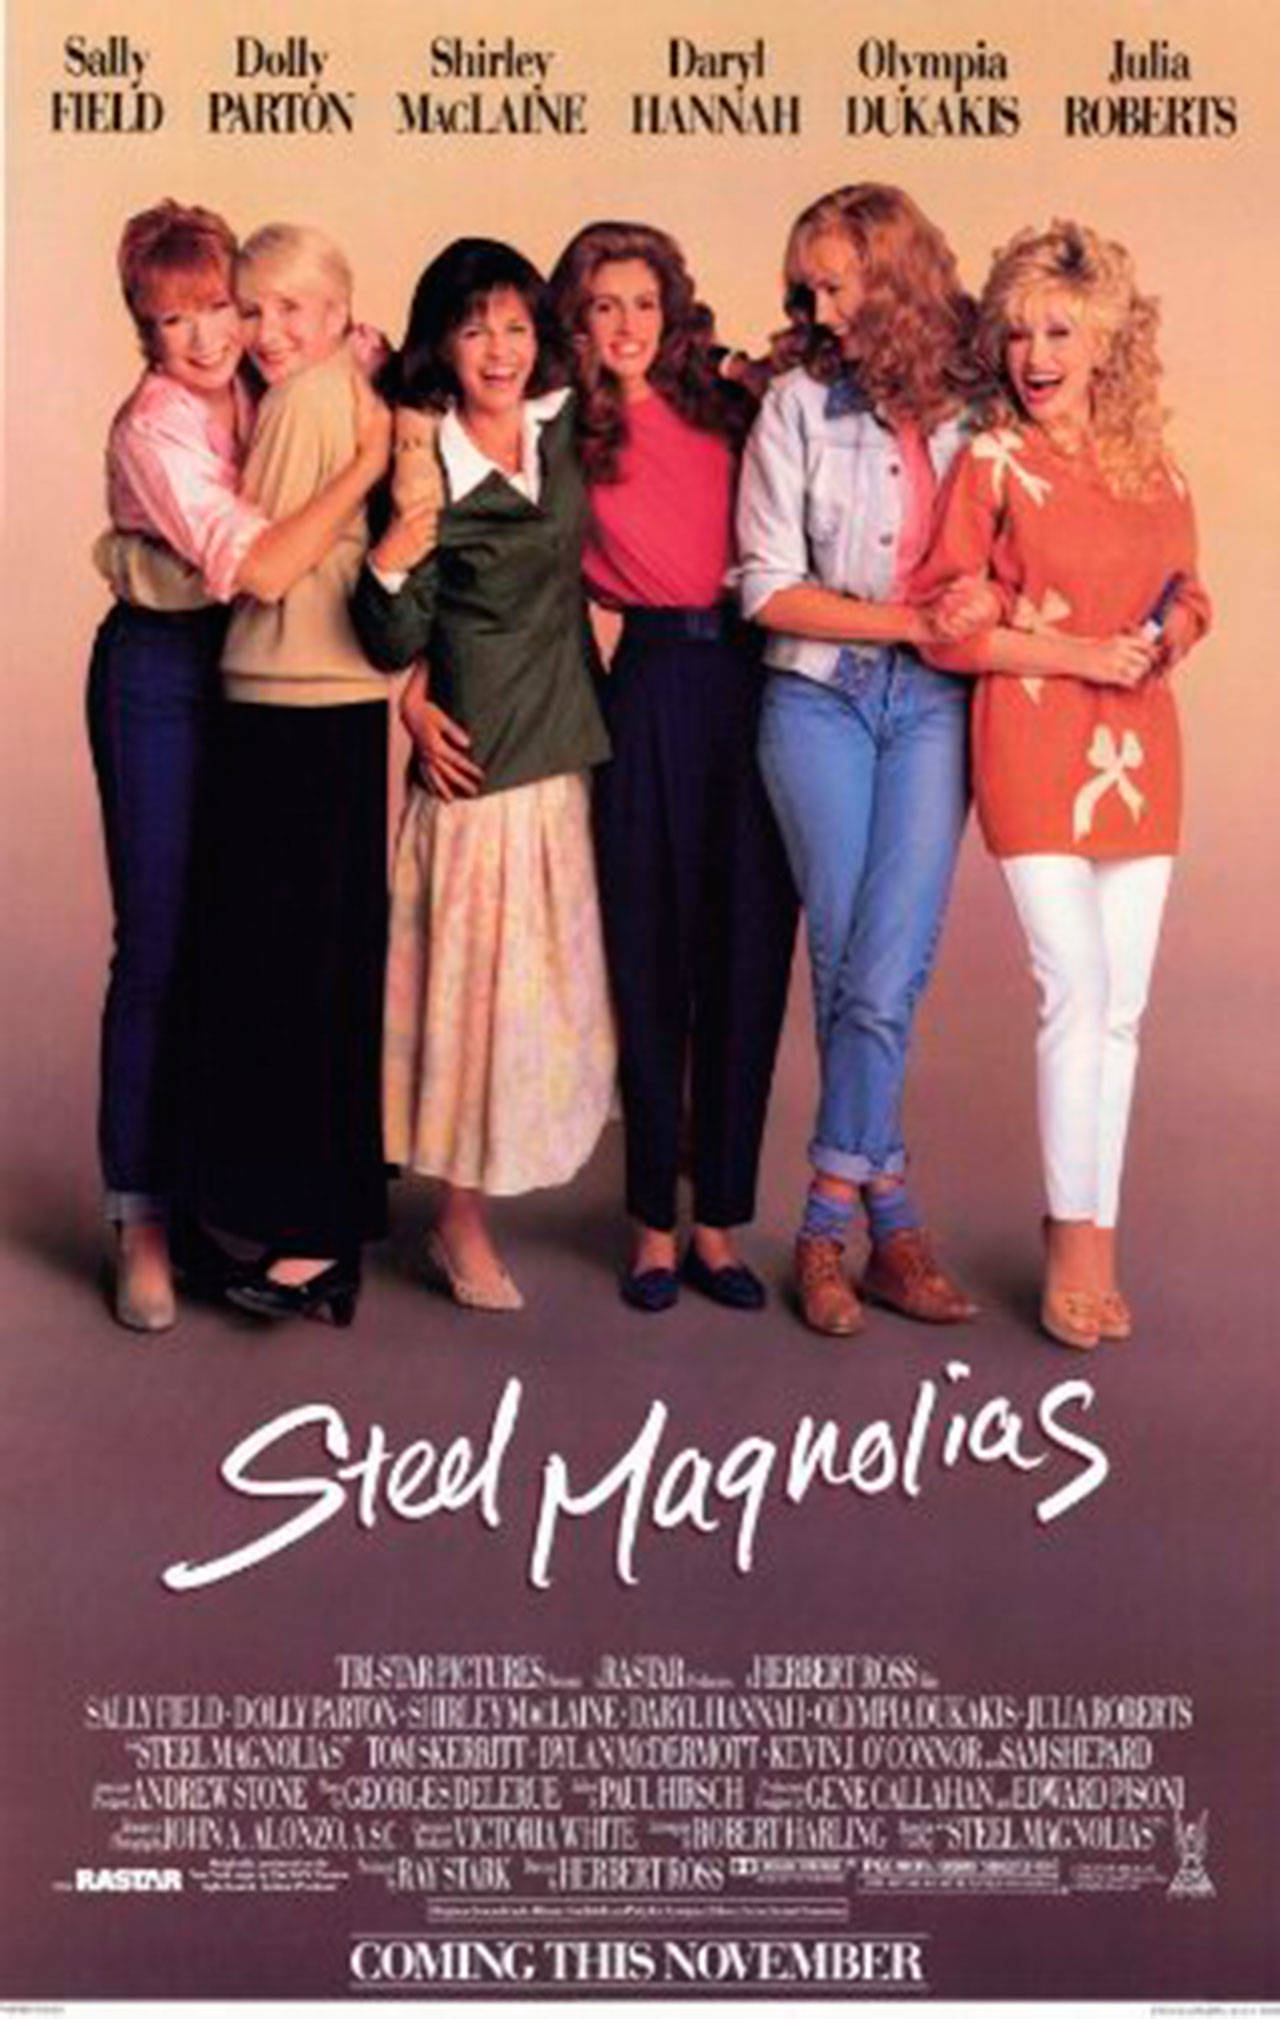 Image courtesy of TriStar Pictures | The 1989 comedy/drama “Steel Magnolias” will return to the big screen at Bainbridge Cinemas for a special 30th anniversary screening at 7 p.m. Wednesday, May 22.